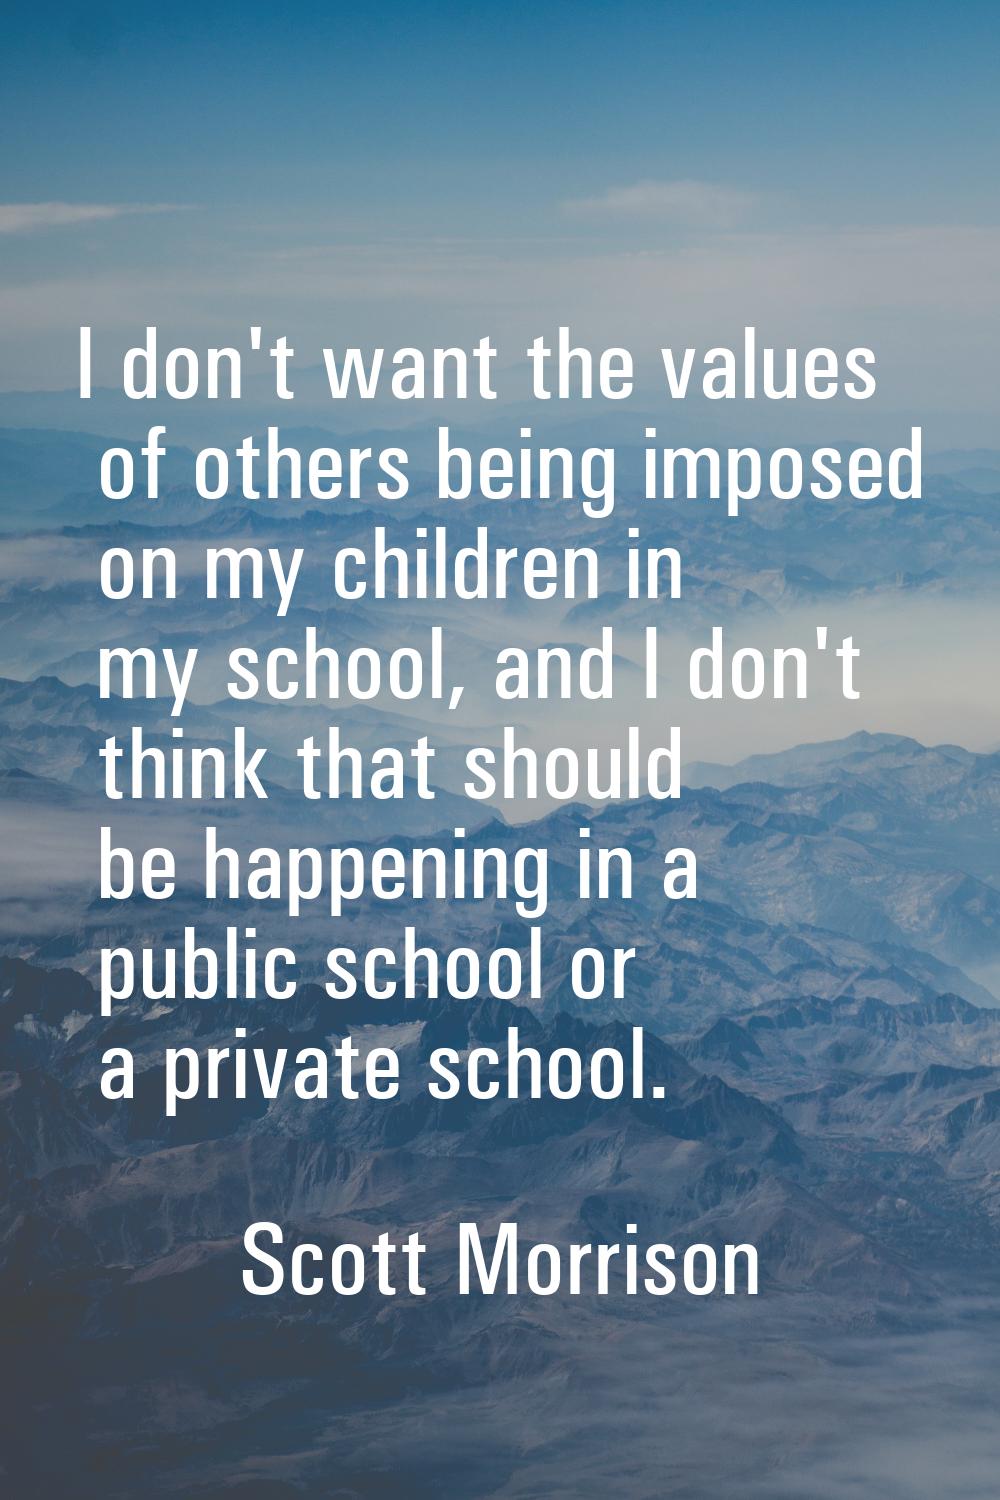 I don't want the values of others being imposed on my children in my school, and I don't think that